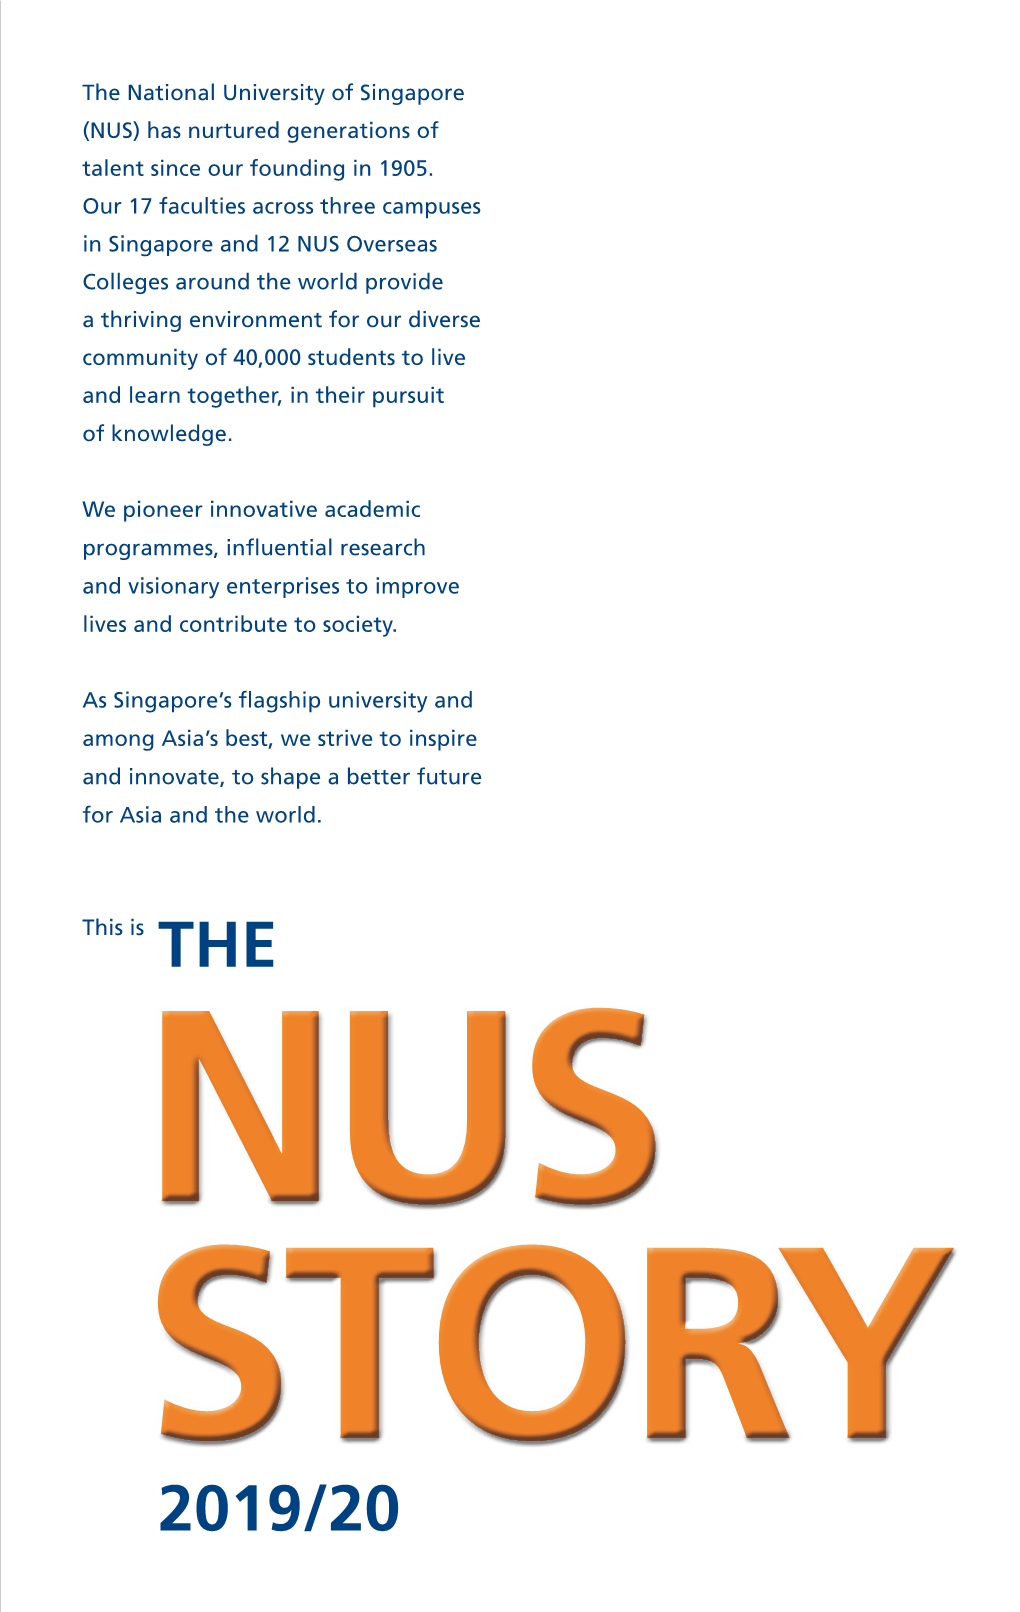 NUS) Has Nurtured Generations of Talent Since Our Founding in 1905